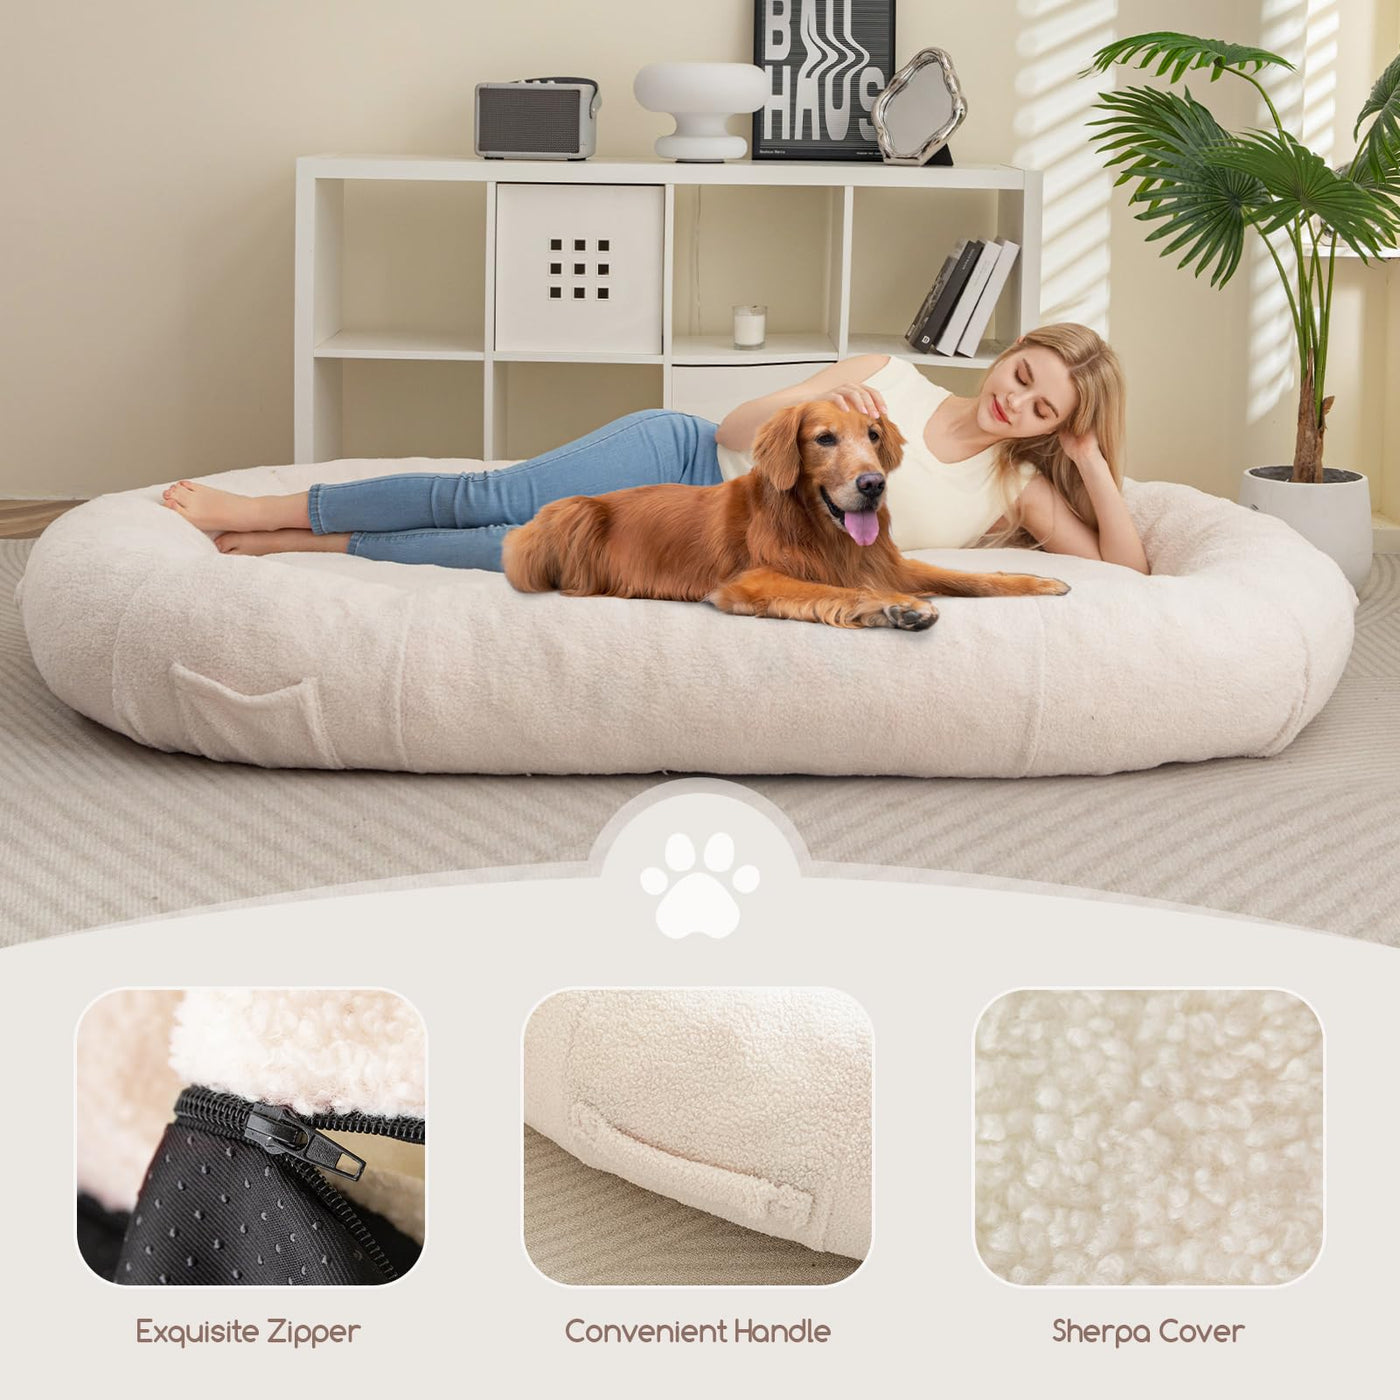 MAXYOYO Giant Dog Bed for Human, Sherpa Dog Bed for Humans Size Fits You and Pets, Beige